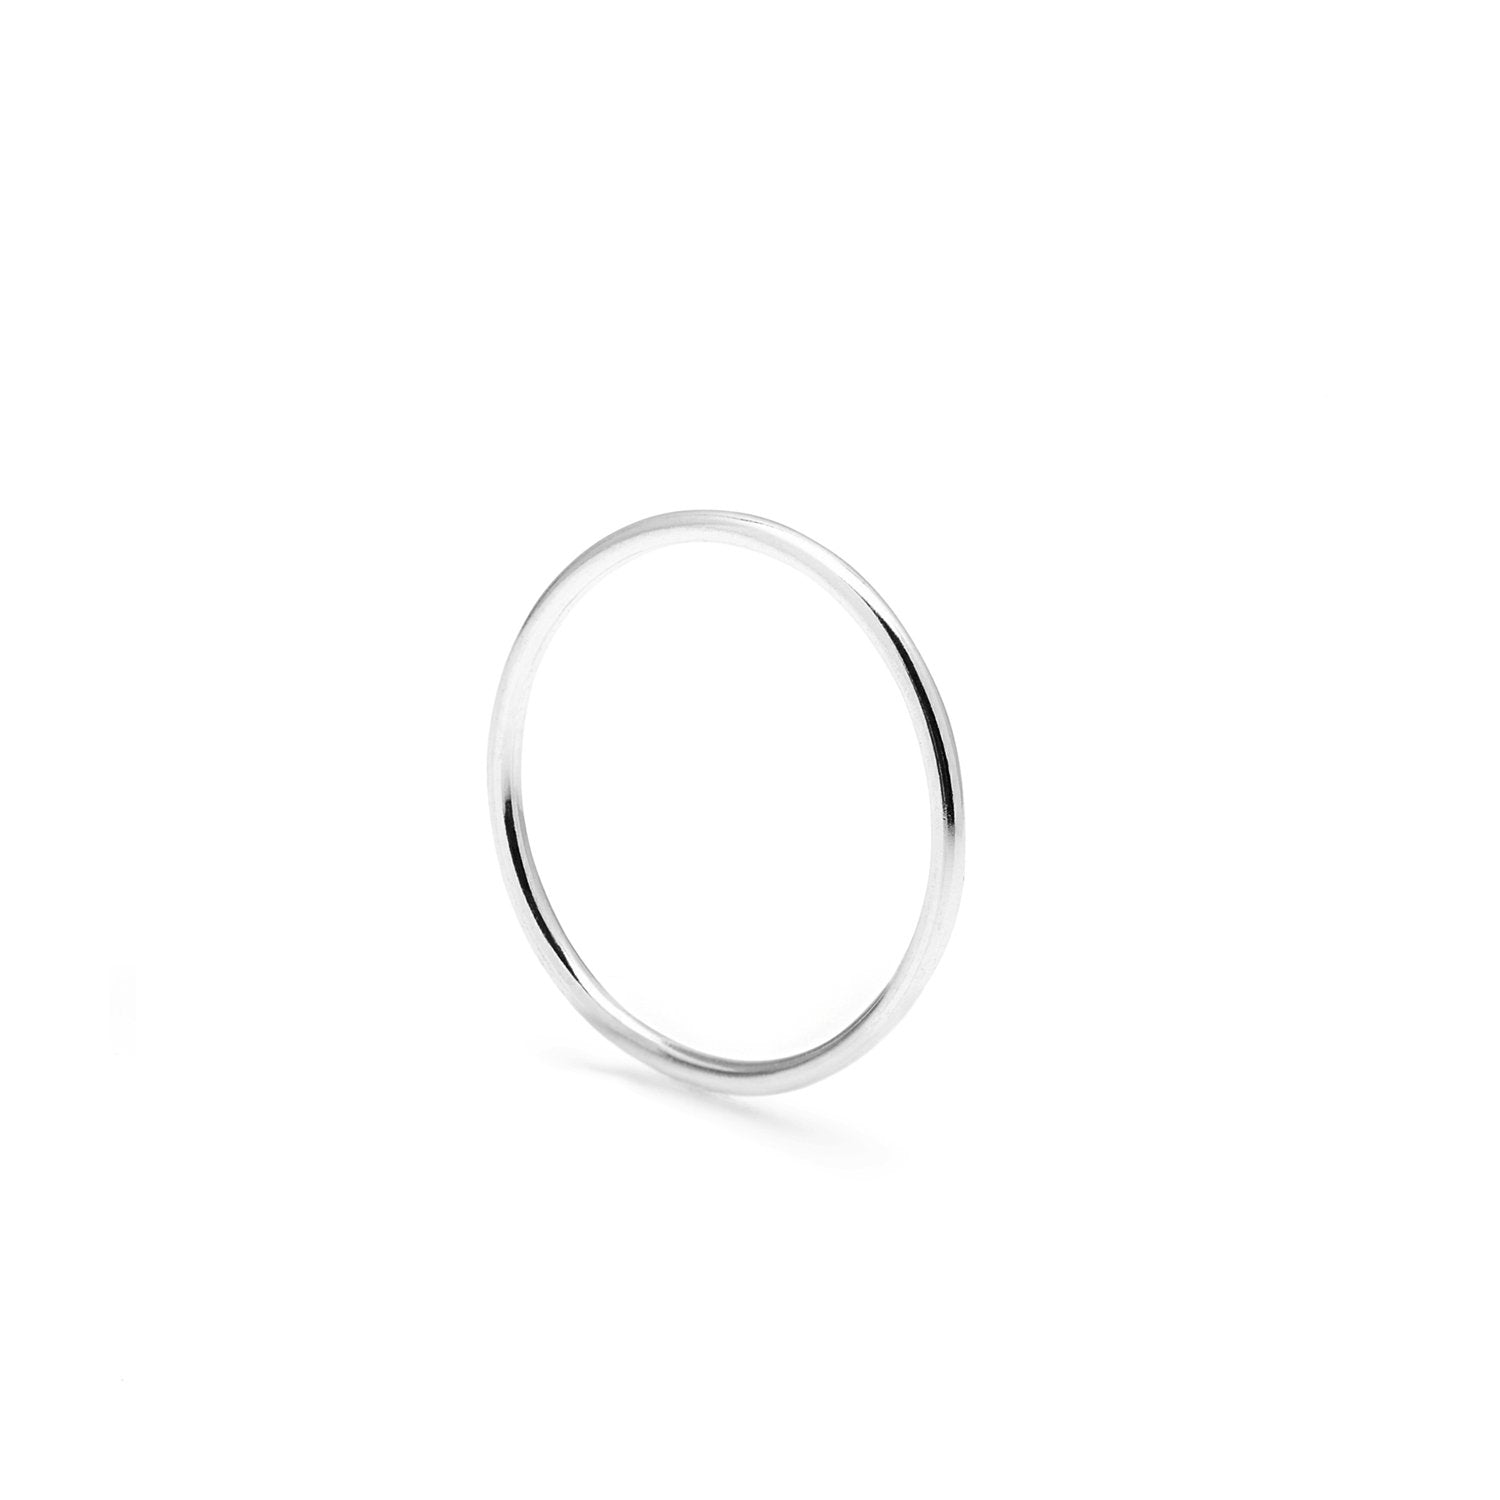 Skinny Round Stacking Ring - Silver - Myia Bonner Jewellery